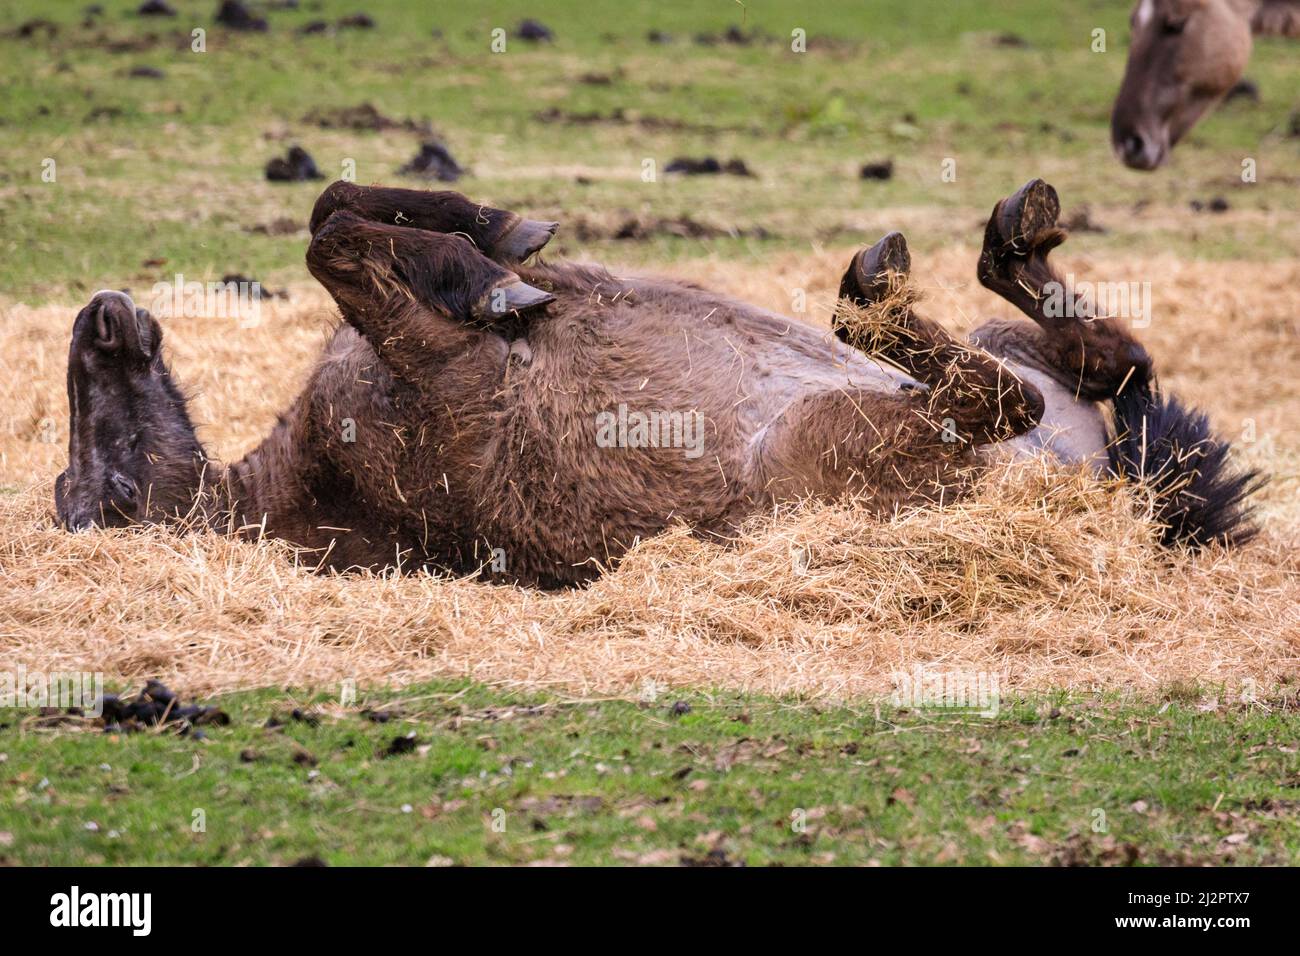 Mehrfelder Bruch, NRW, Germany. 04th Apr, 2022. One of the horses enjoys rolling around in the soft hay feed. A herd of over 300 of of Dülmen Ponies an endangered species and ancient breed, live in feral conditions, but in a protected areas of c. 350 hectares with woods and grassland at Merfelder Bruch Nature Reserve. The herd lives in family clans with very little human interference apart from occasional provision of hay in winter. Credit: Imageplotter/Alamy Live News Stock Photo